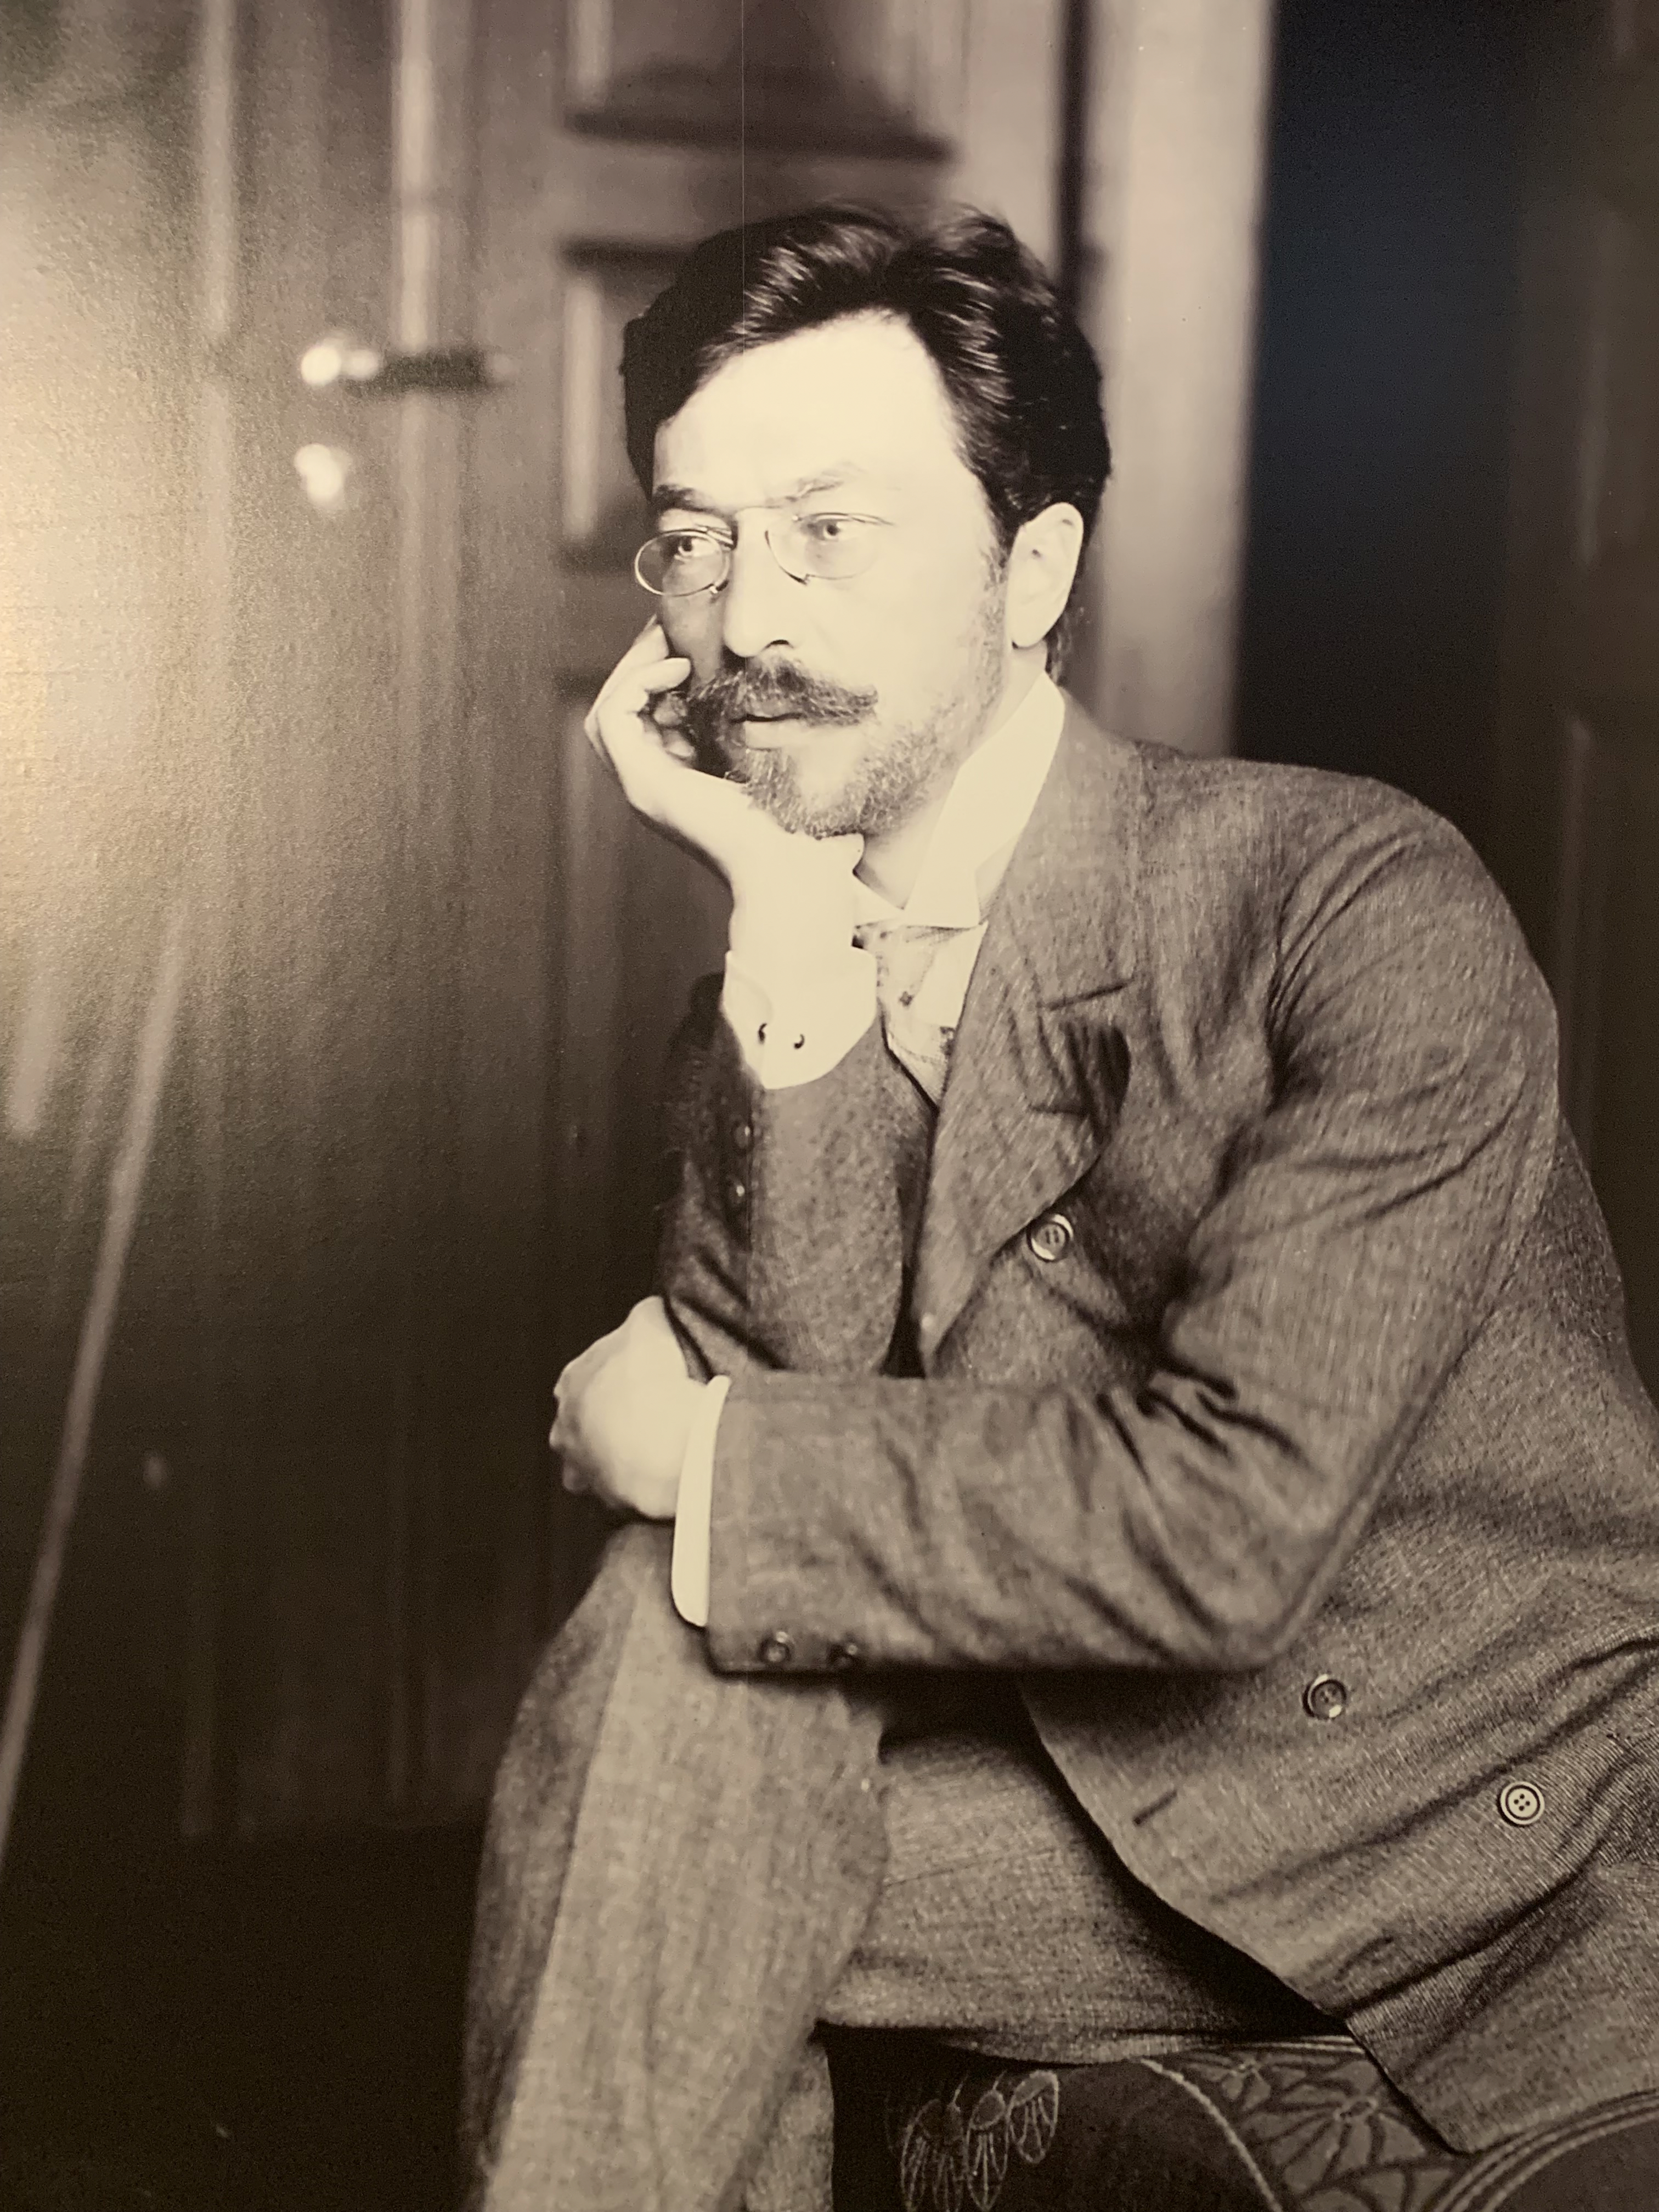 A black and white photo of Vasily Kandinsky taken in 1905 shows him seated, wearing a suit and looking thoughtful.